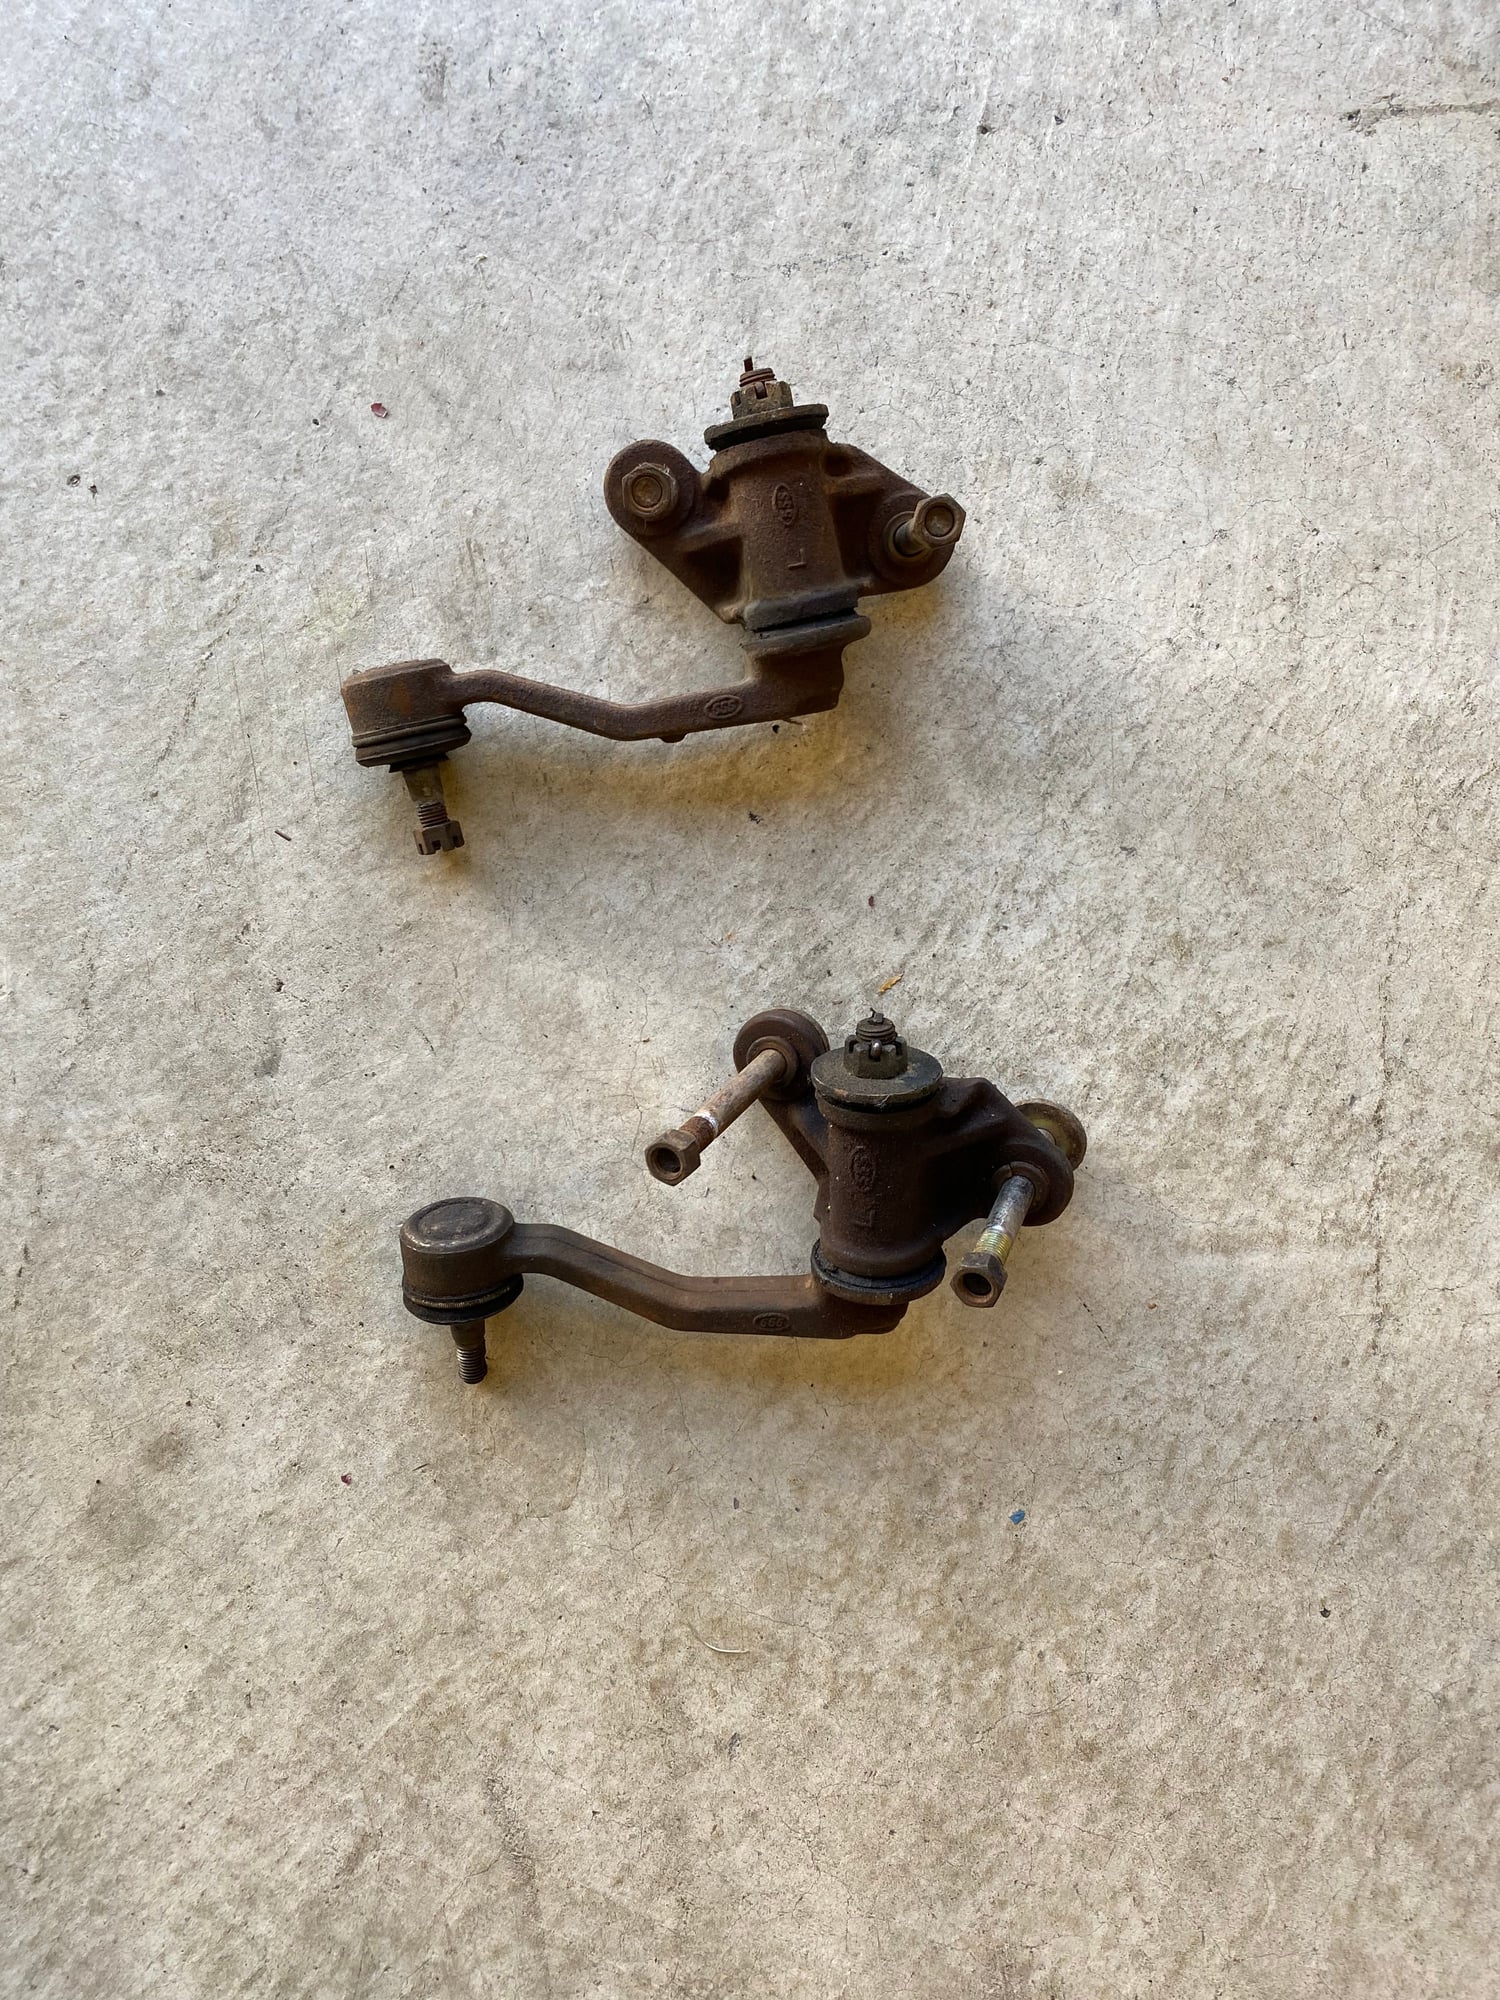 Steering/Suspension - Stock front and rear suspension parts - Used - 1979 to 1985 Mazda RX-7 - Akron, OH 44321, United States